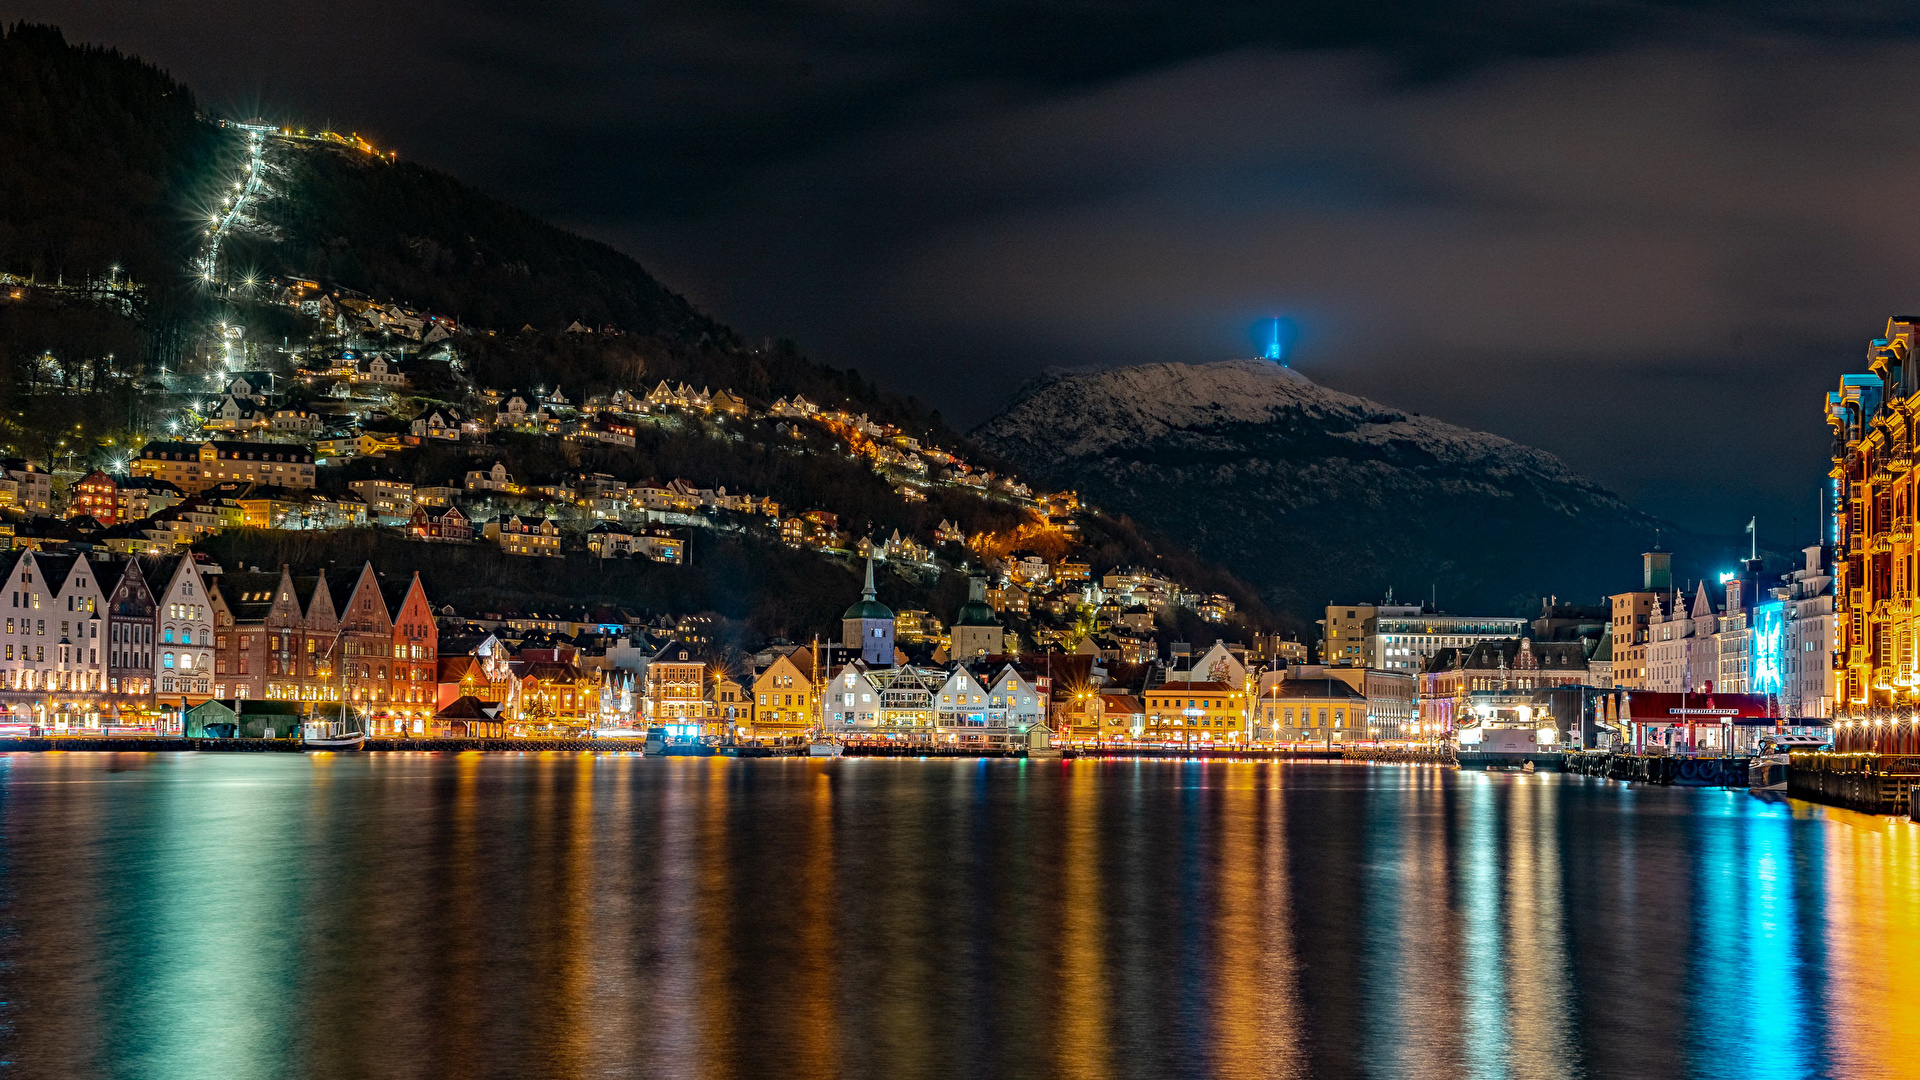 Image Cities Norway Mountains Bay Bergen Marinas Houses